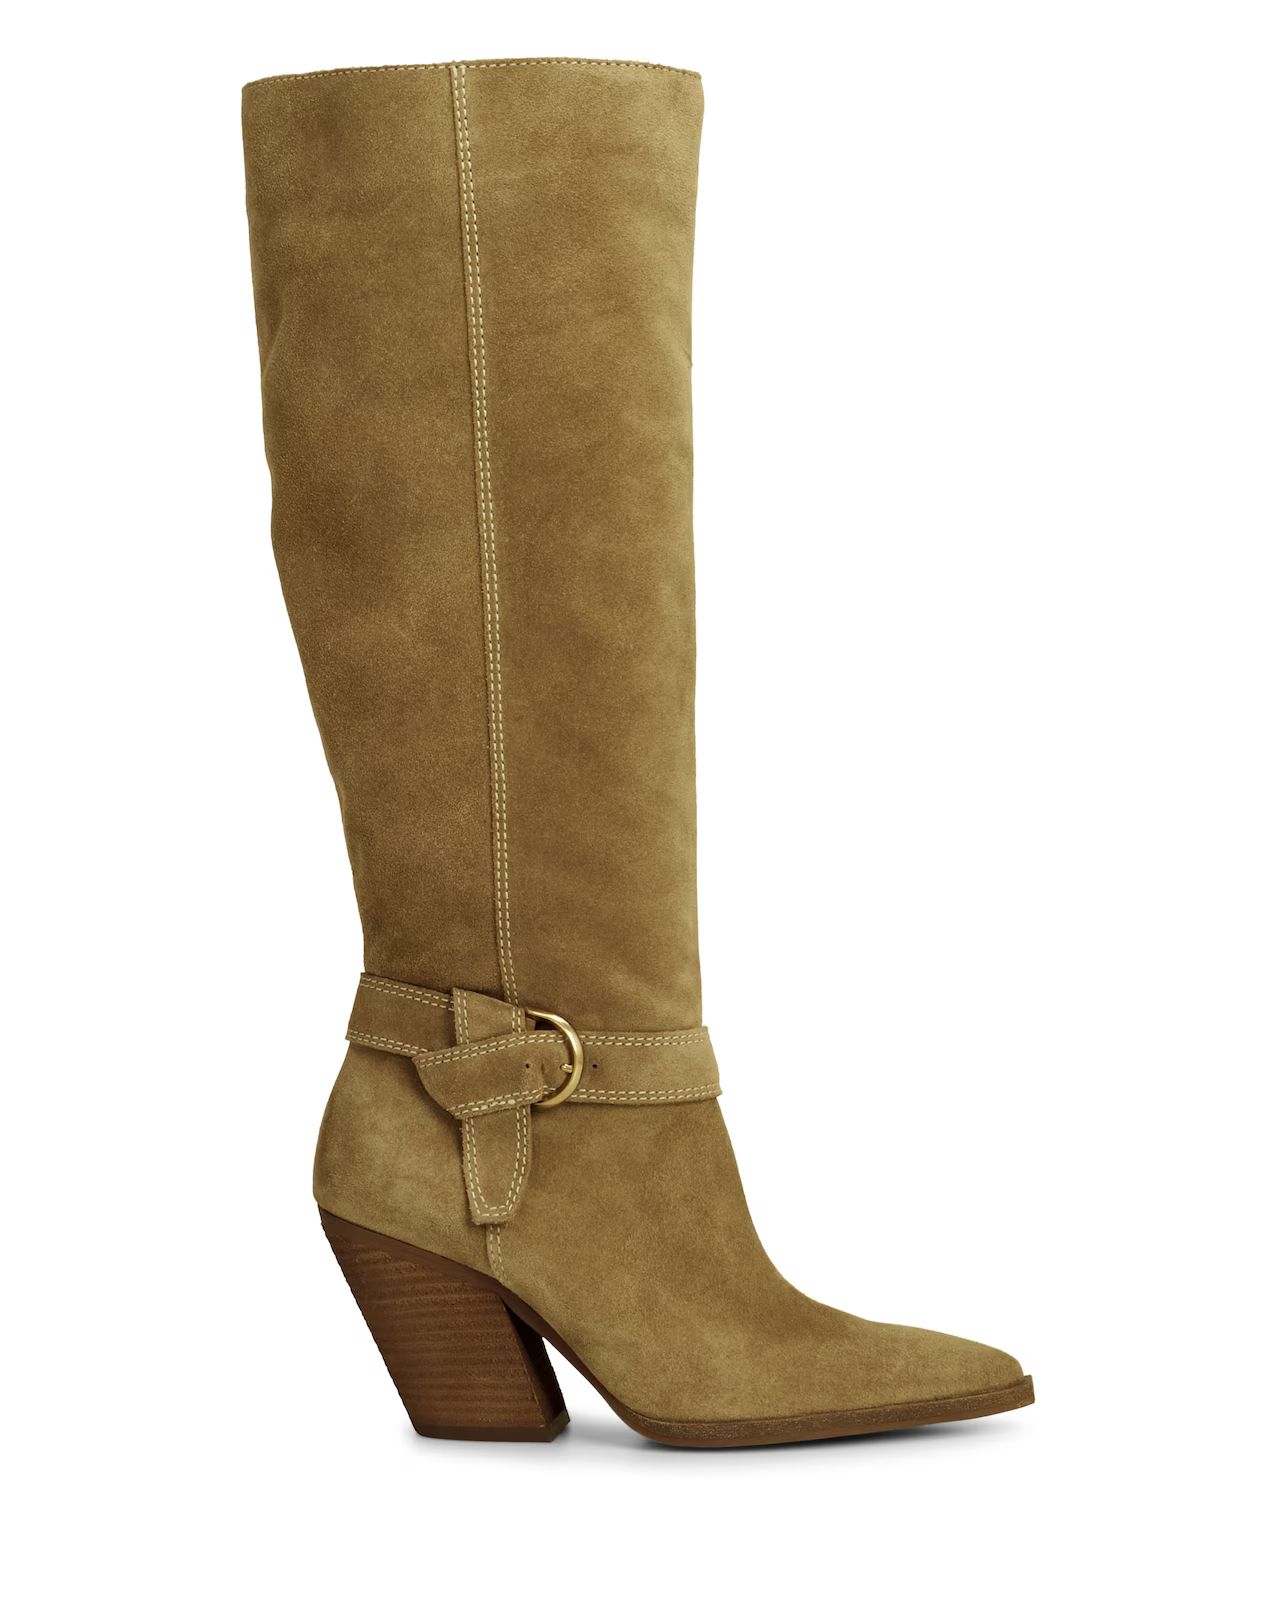 Vince Camuto Grathlyn Boot | Vince Camuto